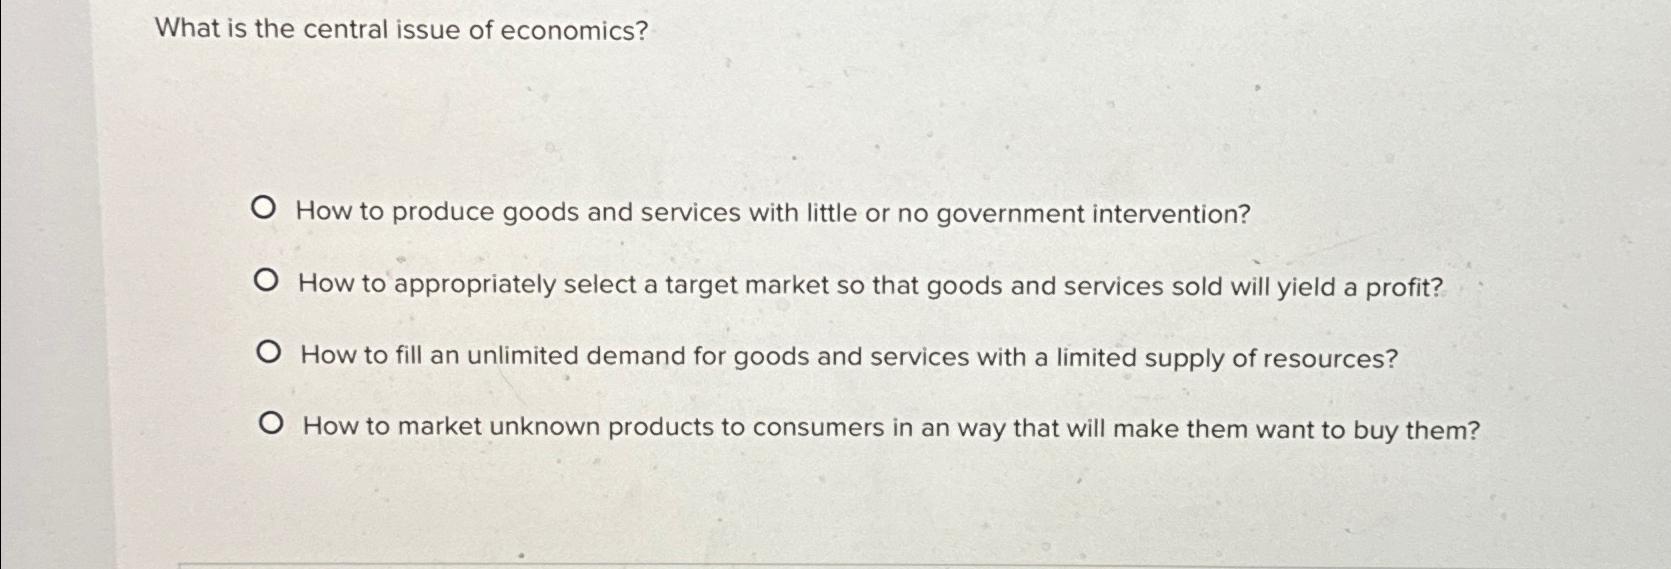 What is the central issue of economics? O How to produce goods and services with little or no government